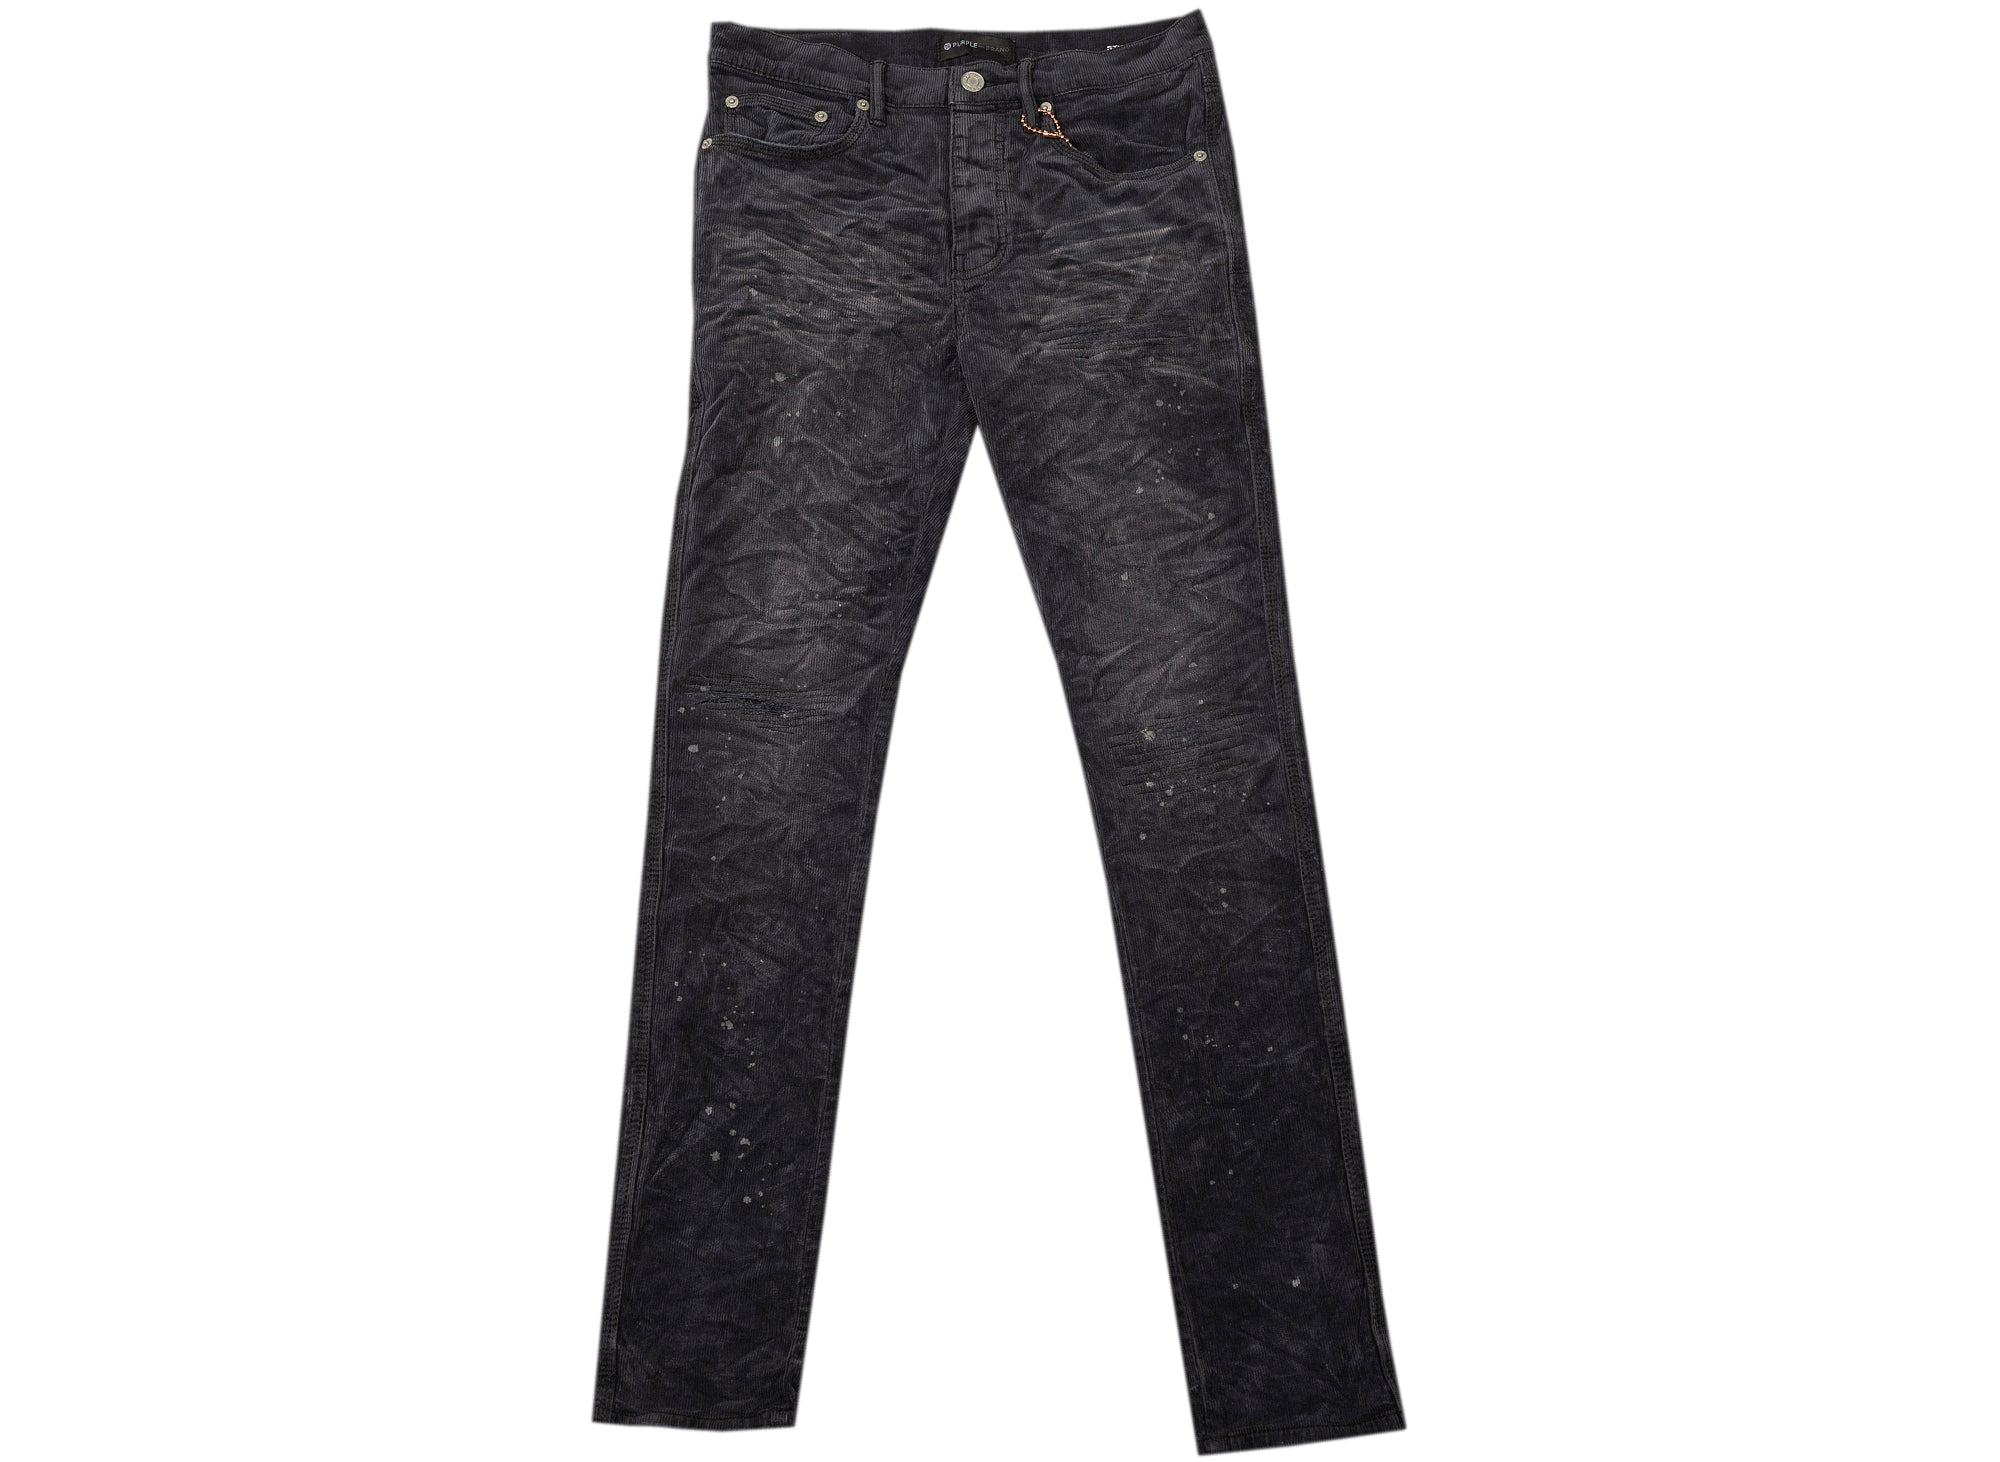 Purple Brand Aged Black Washed Jeans – Oneness Boutique